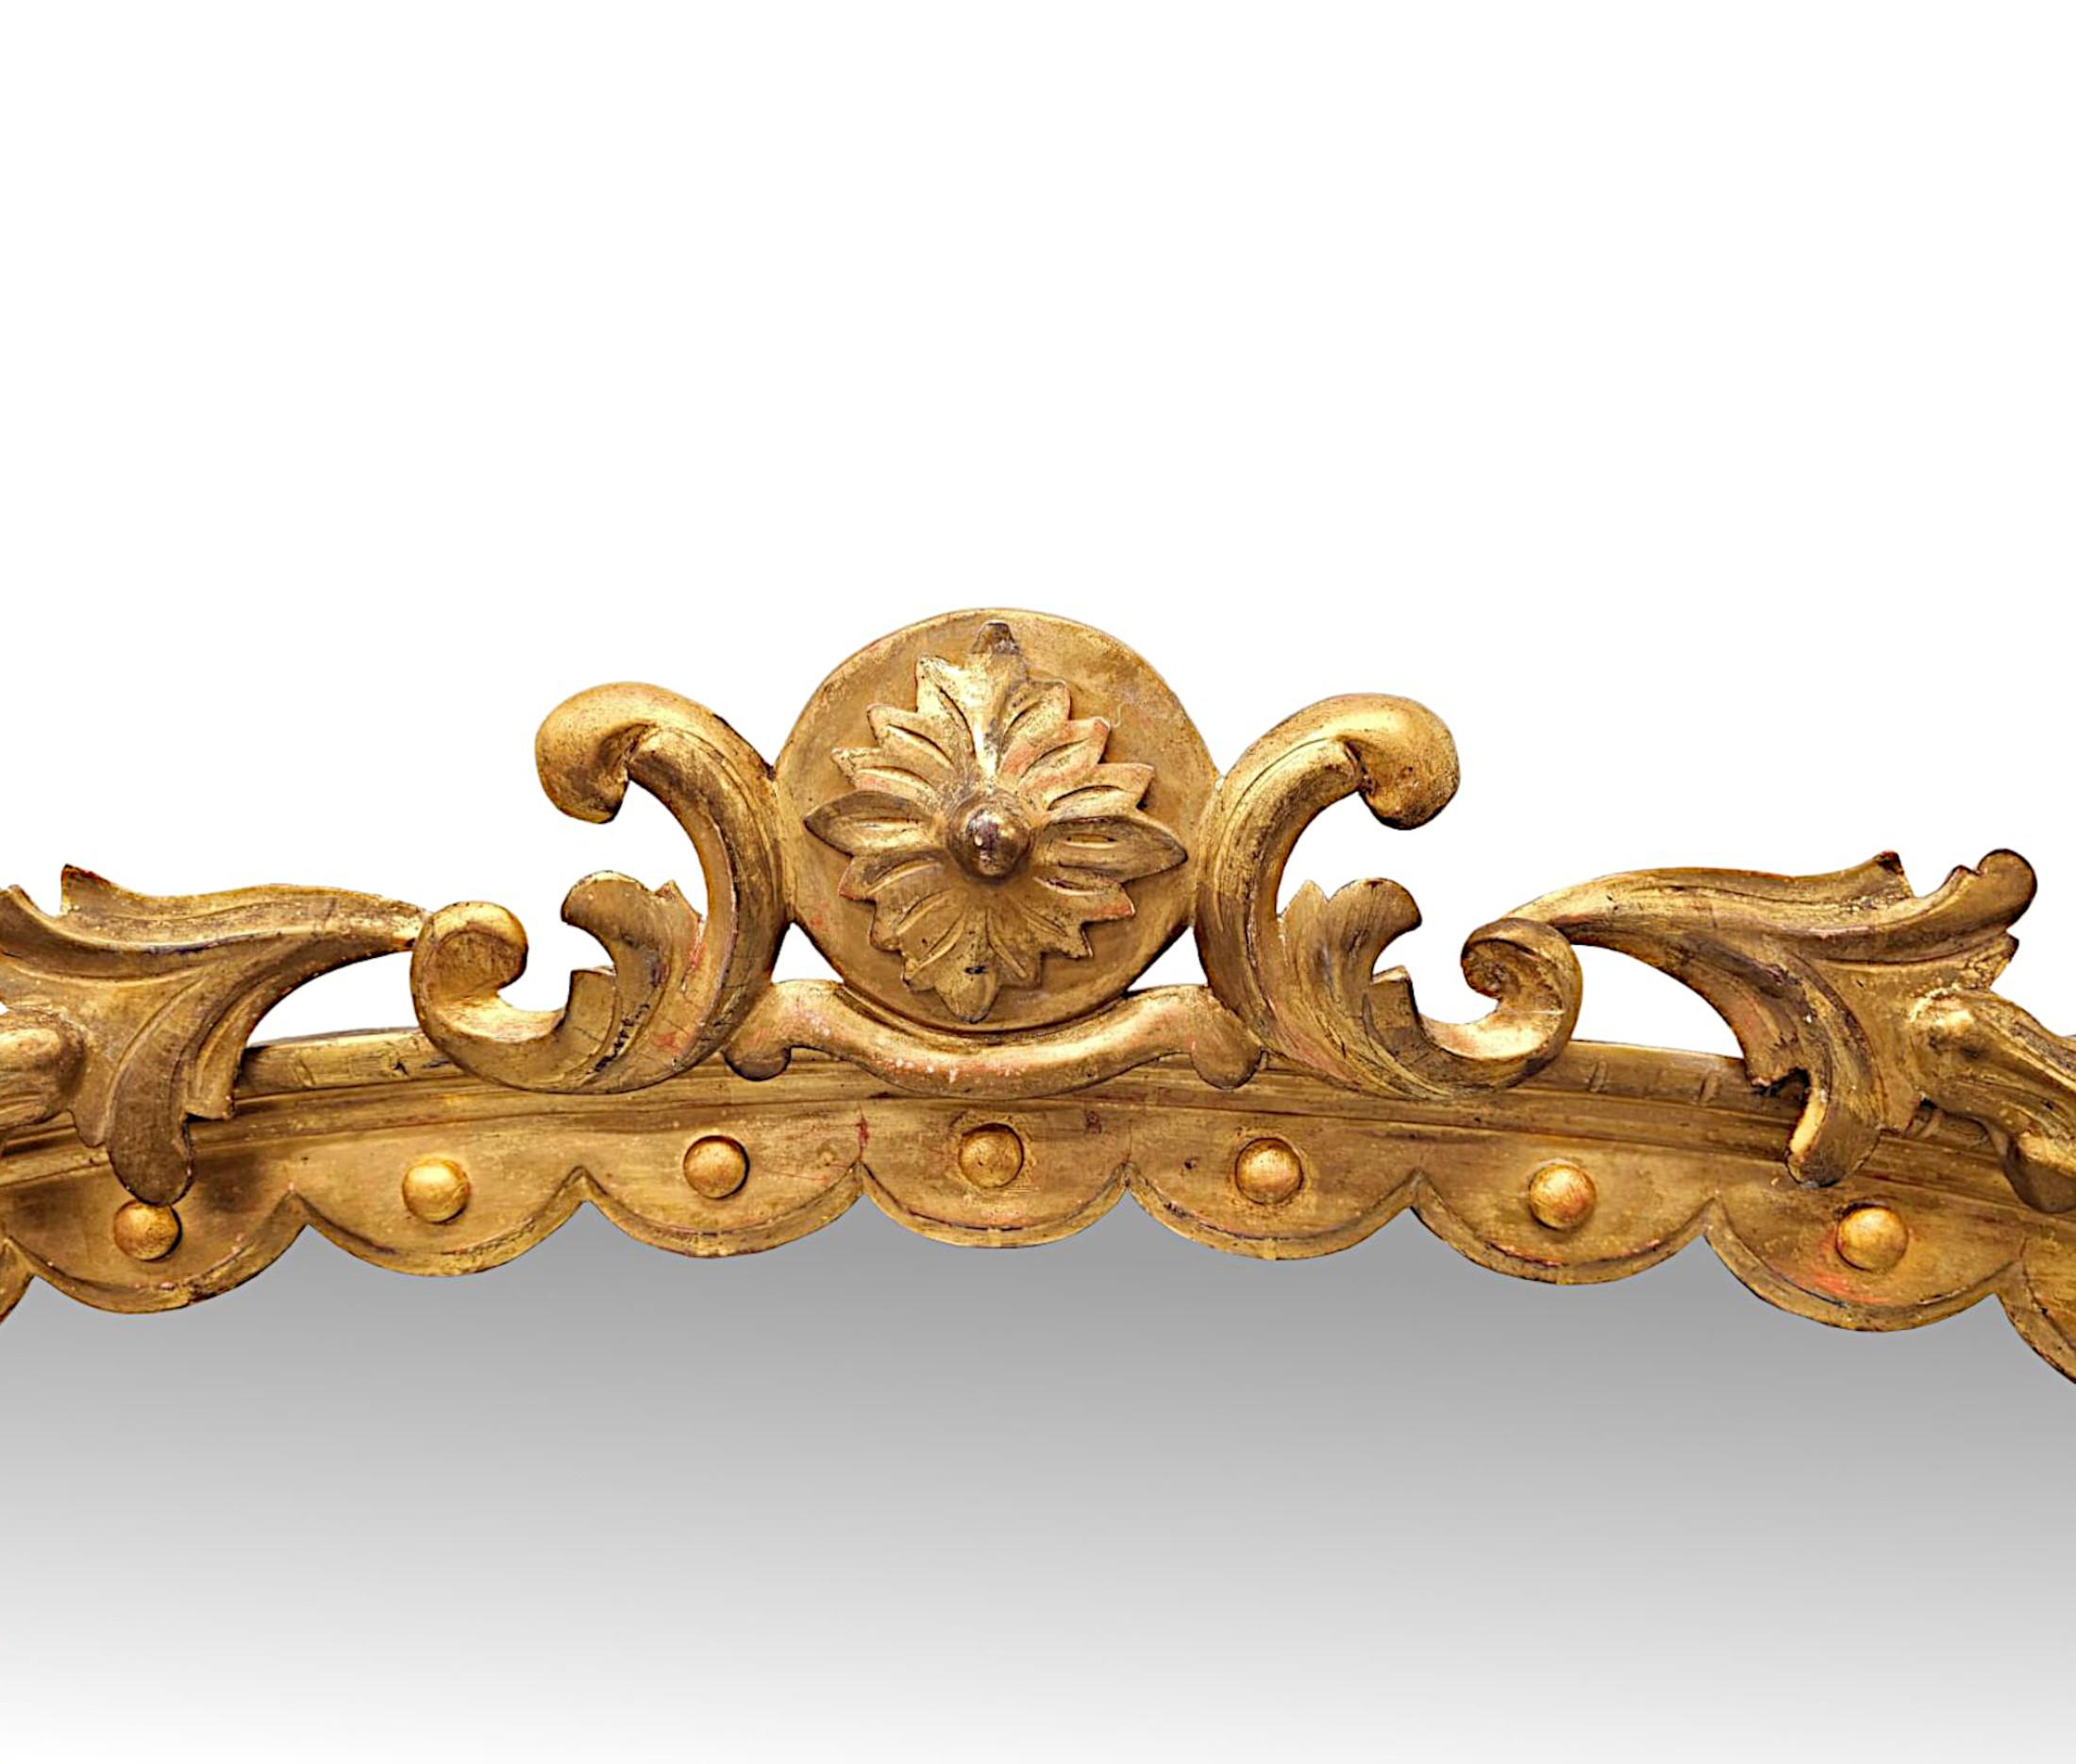 A fabulous 19th Century giltwood overmantel mirror, finely hand carved and of exceptional quality.  The mirror glass plate of shaped rectangular form is set within a stunning pierced, moulded and fluted giltwood frame with pilaster columns to the